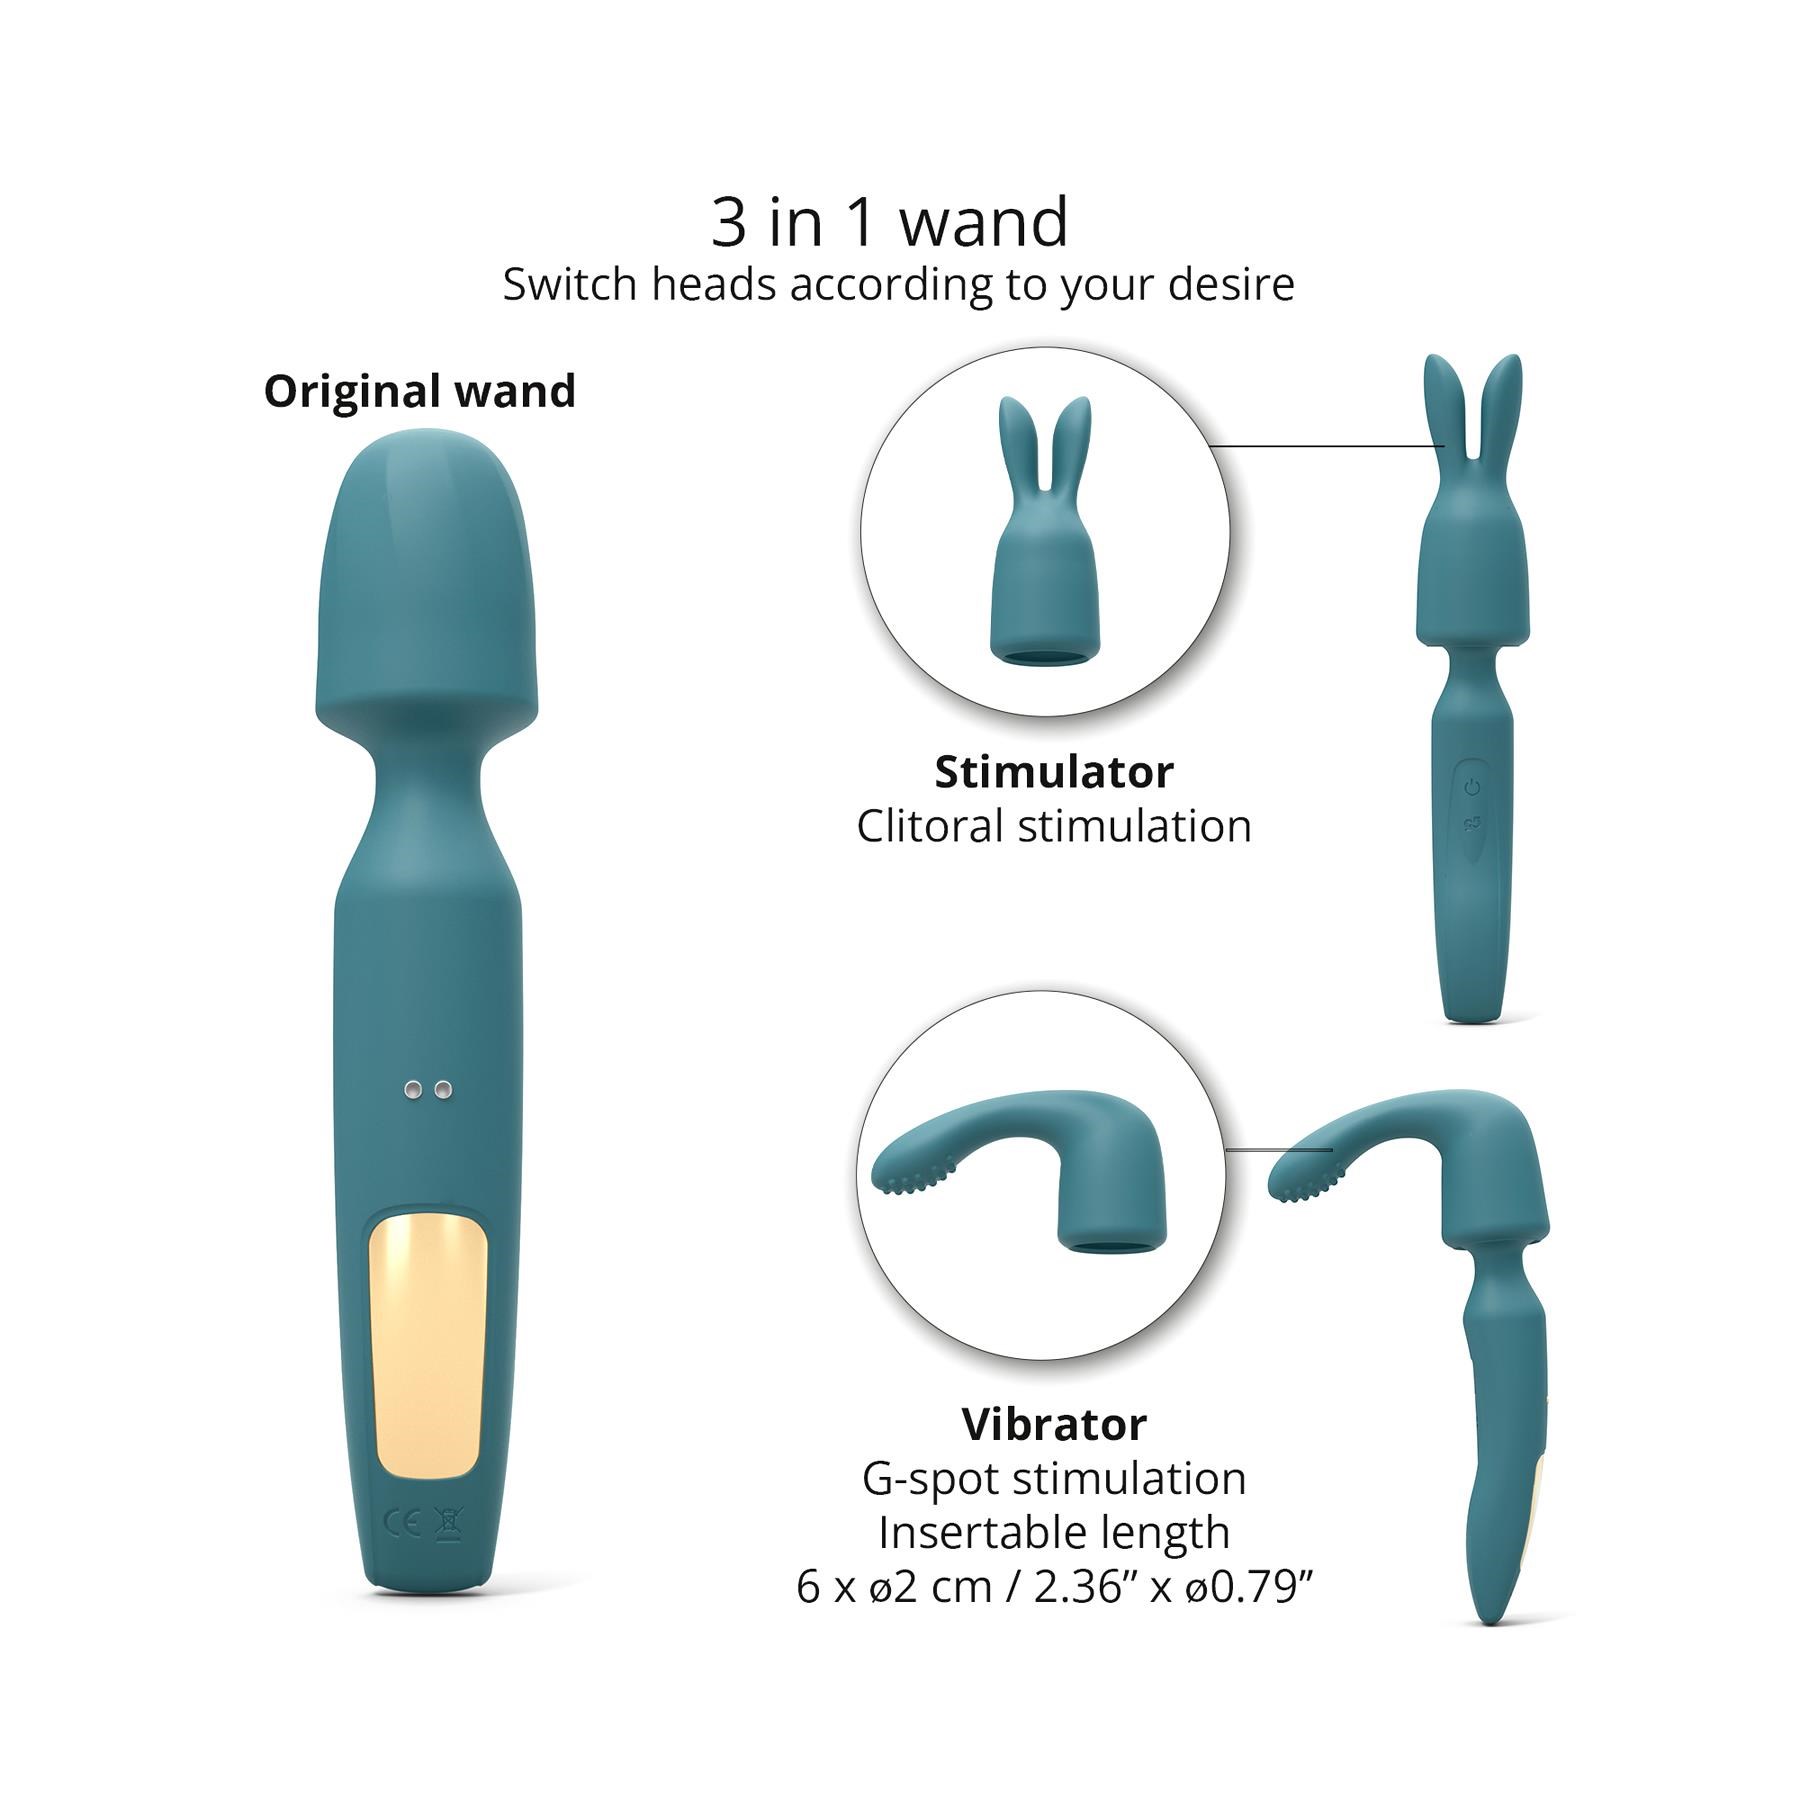 R-Evolution Wand Massager With Attachments - Features and Dimensions